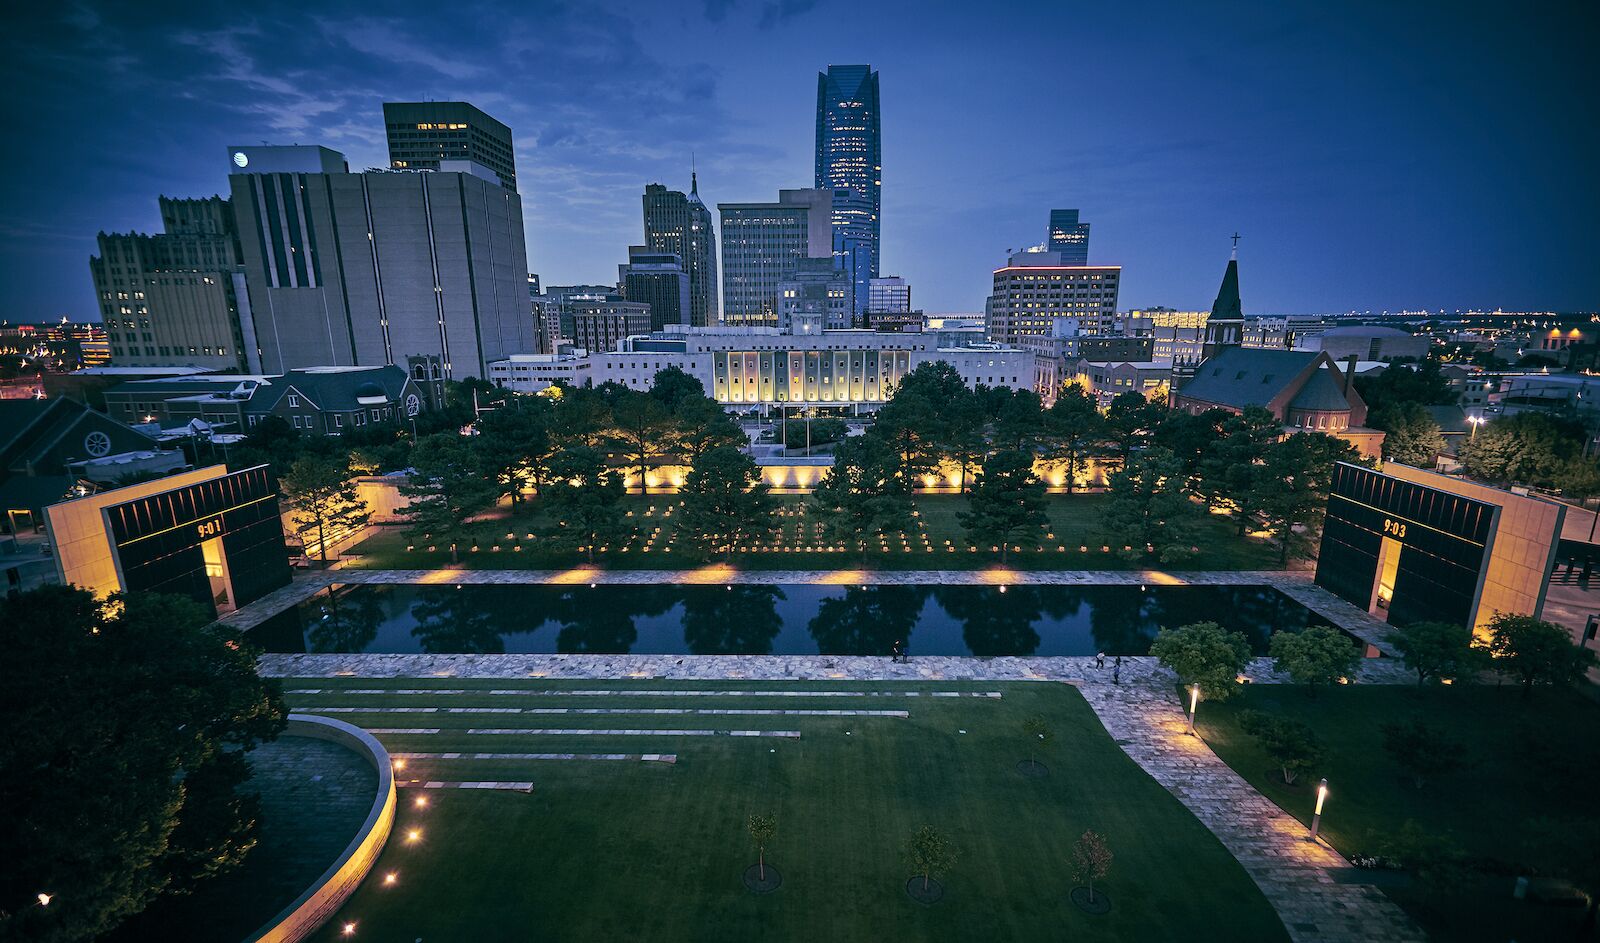 Oklahoma City bombing memorial at night from above, museums in Oklahoma City